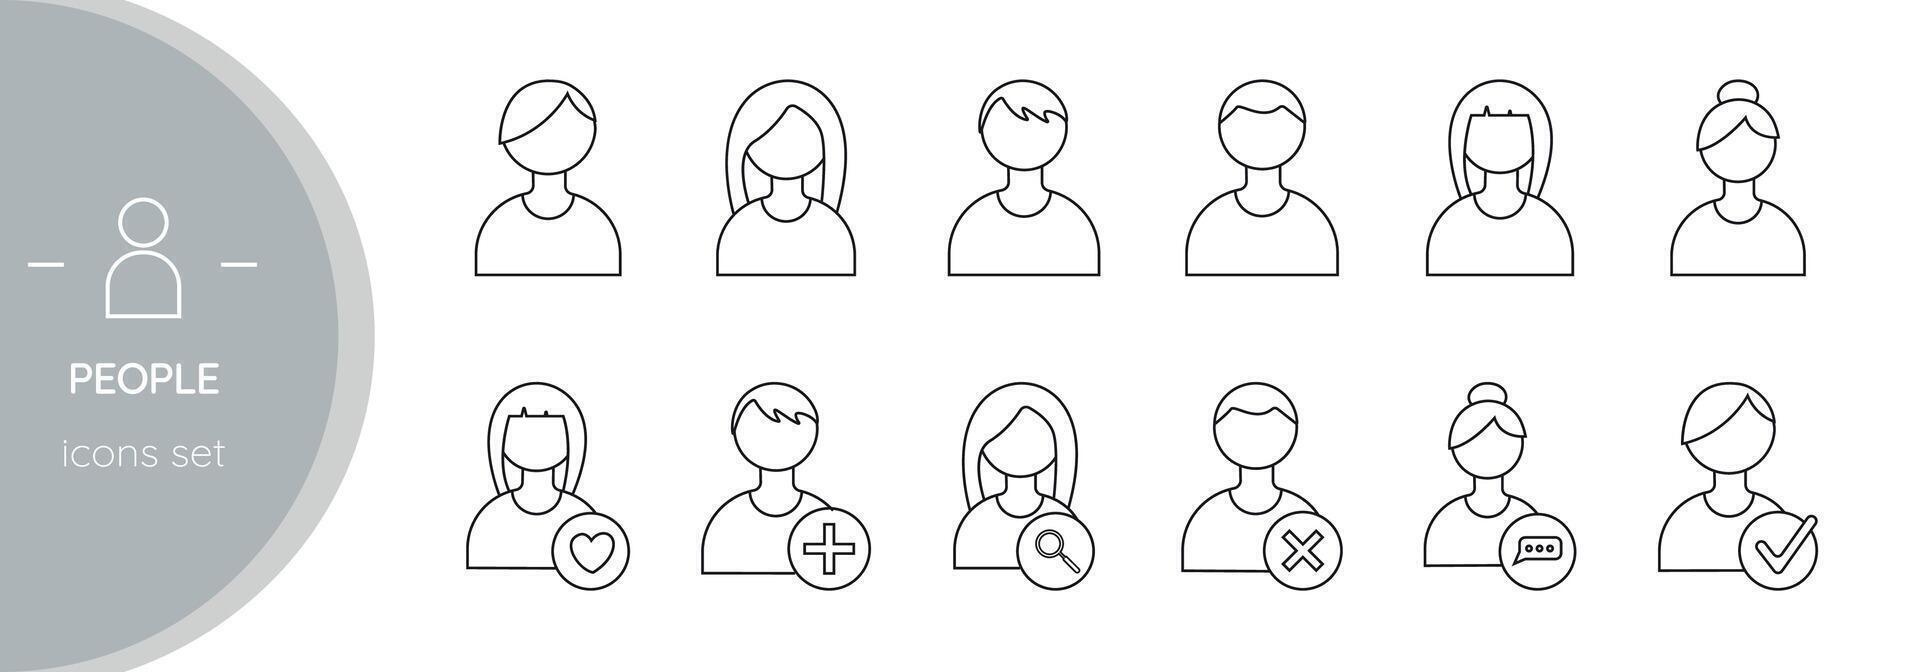 Set of people icons vector